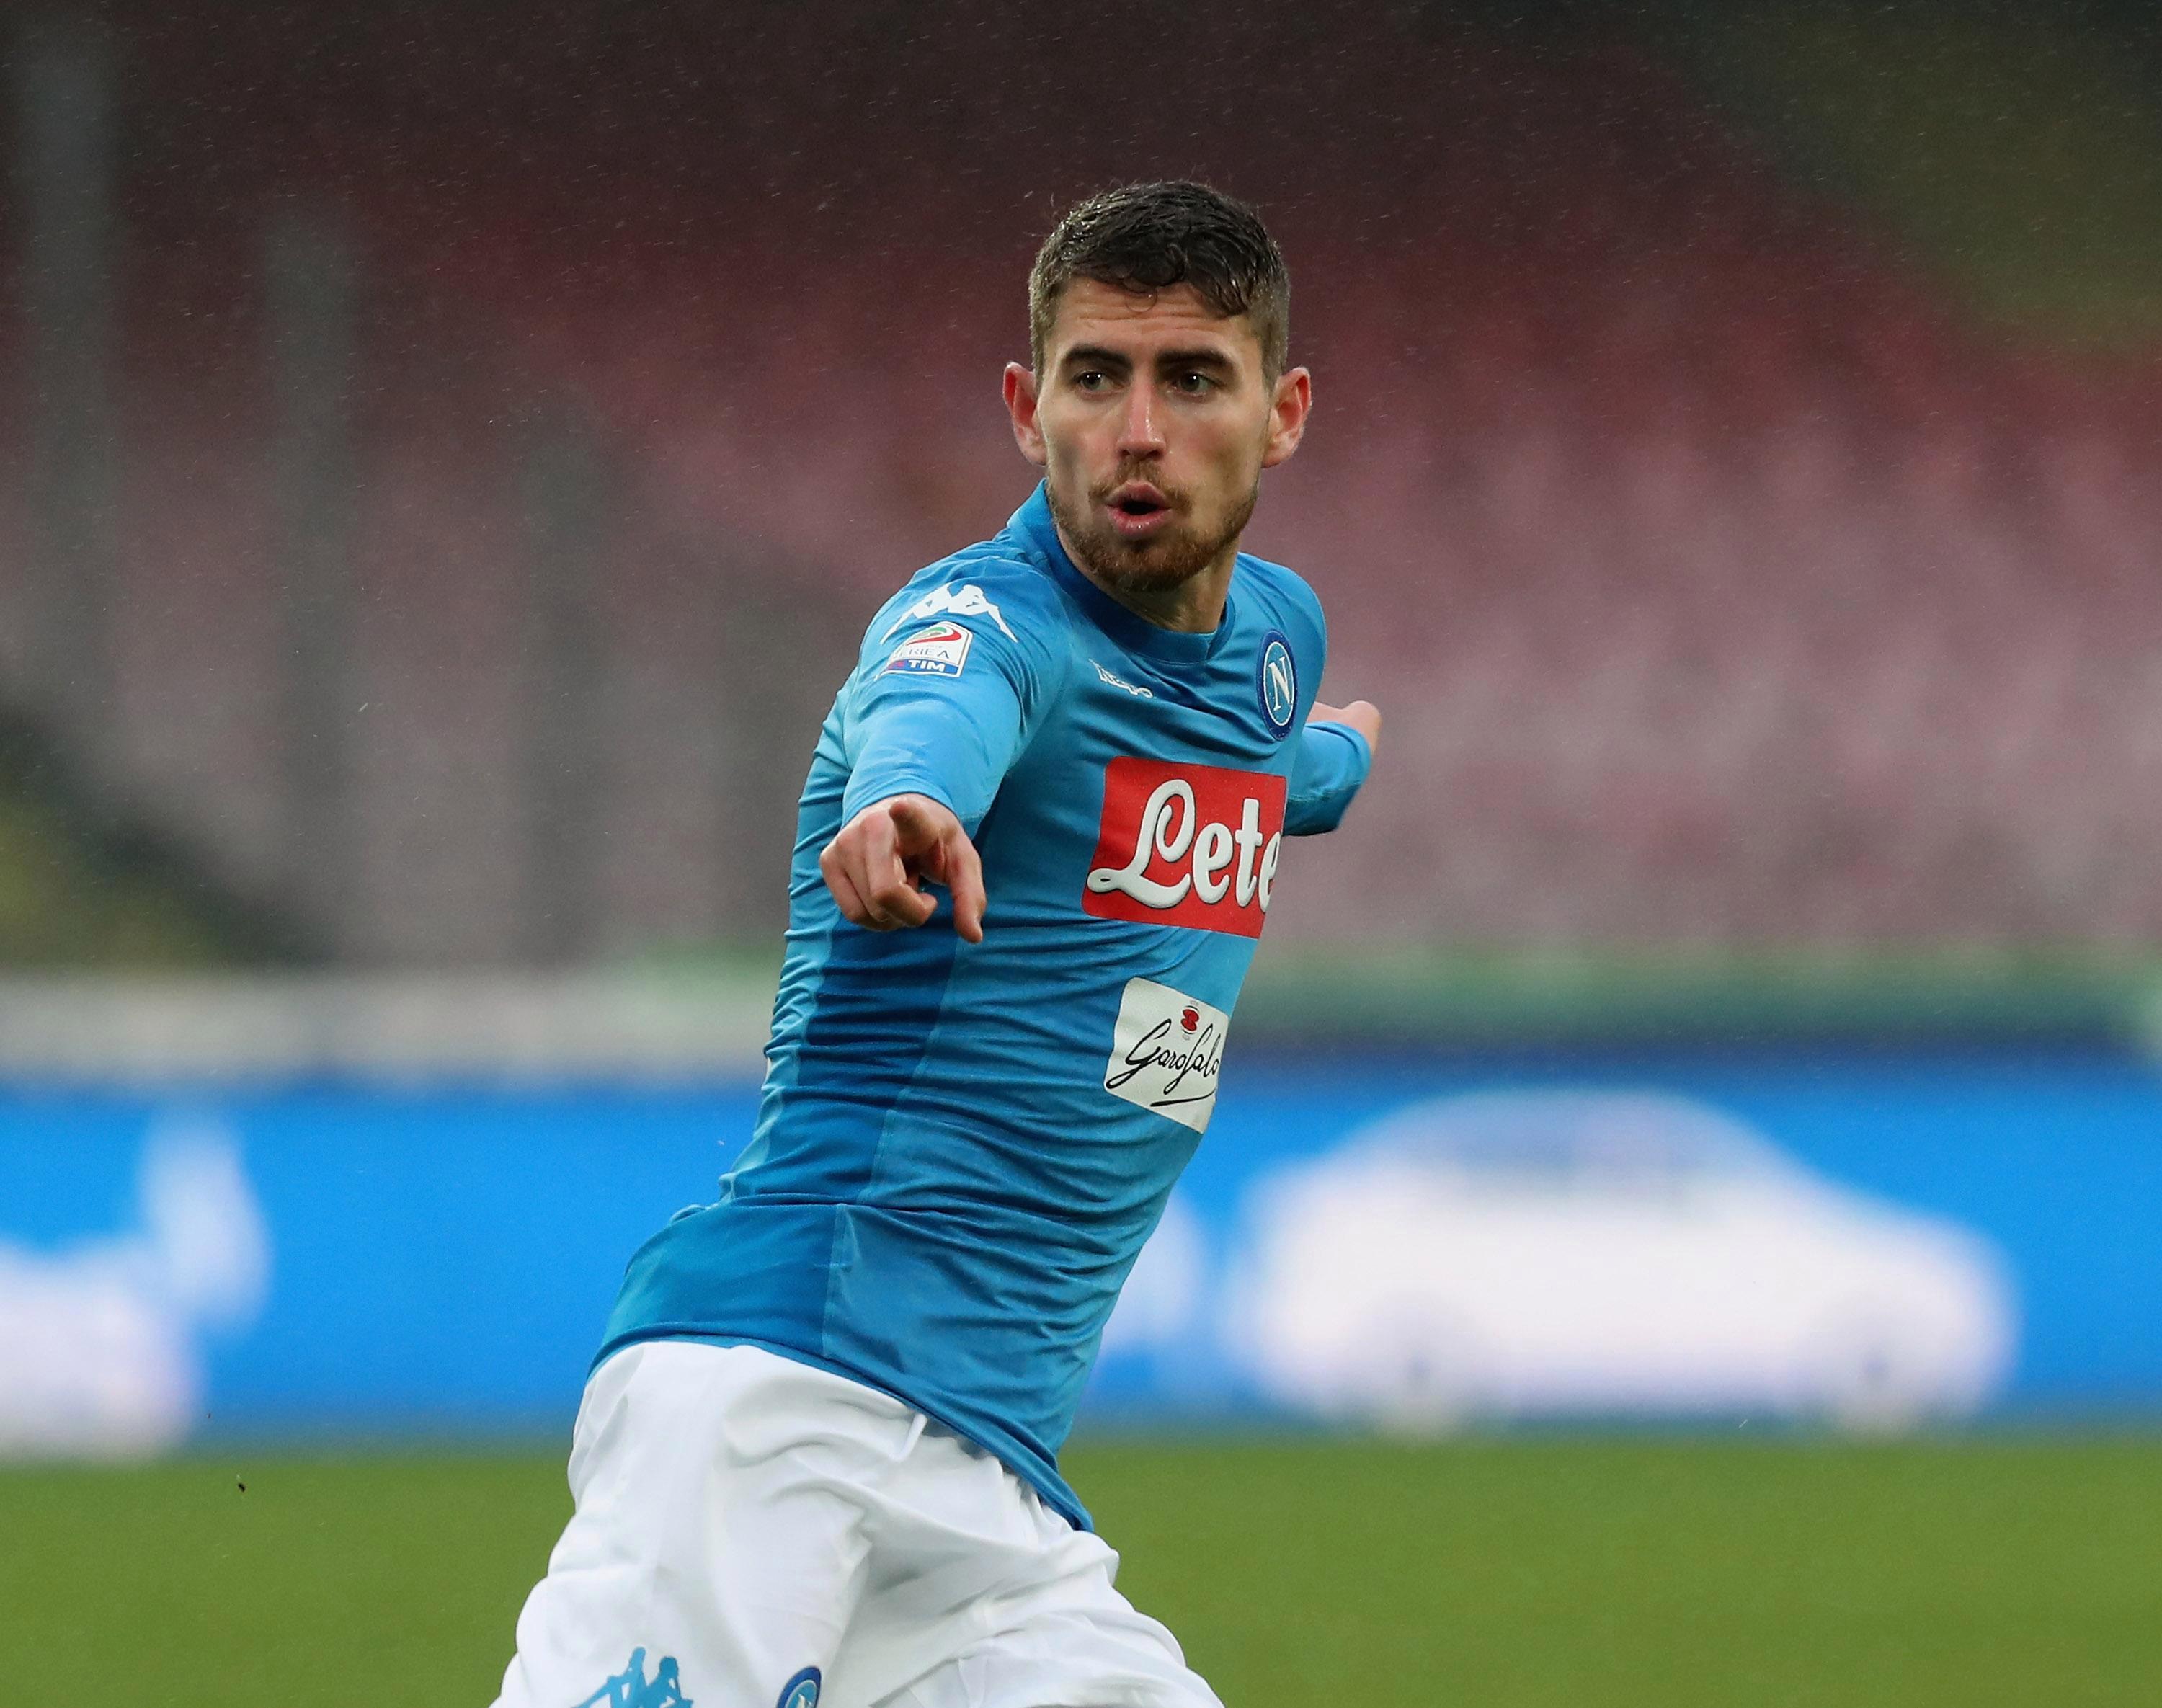 Jorginho set for Chelsea medical ahead of £57m move from Napoli